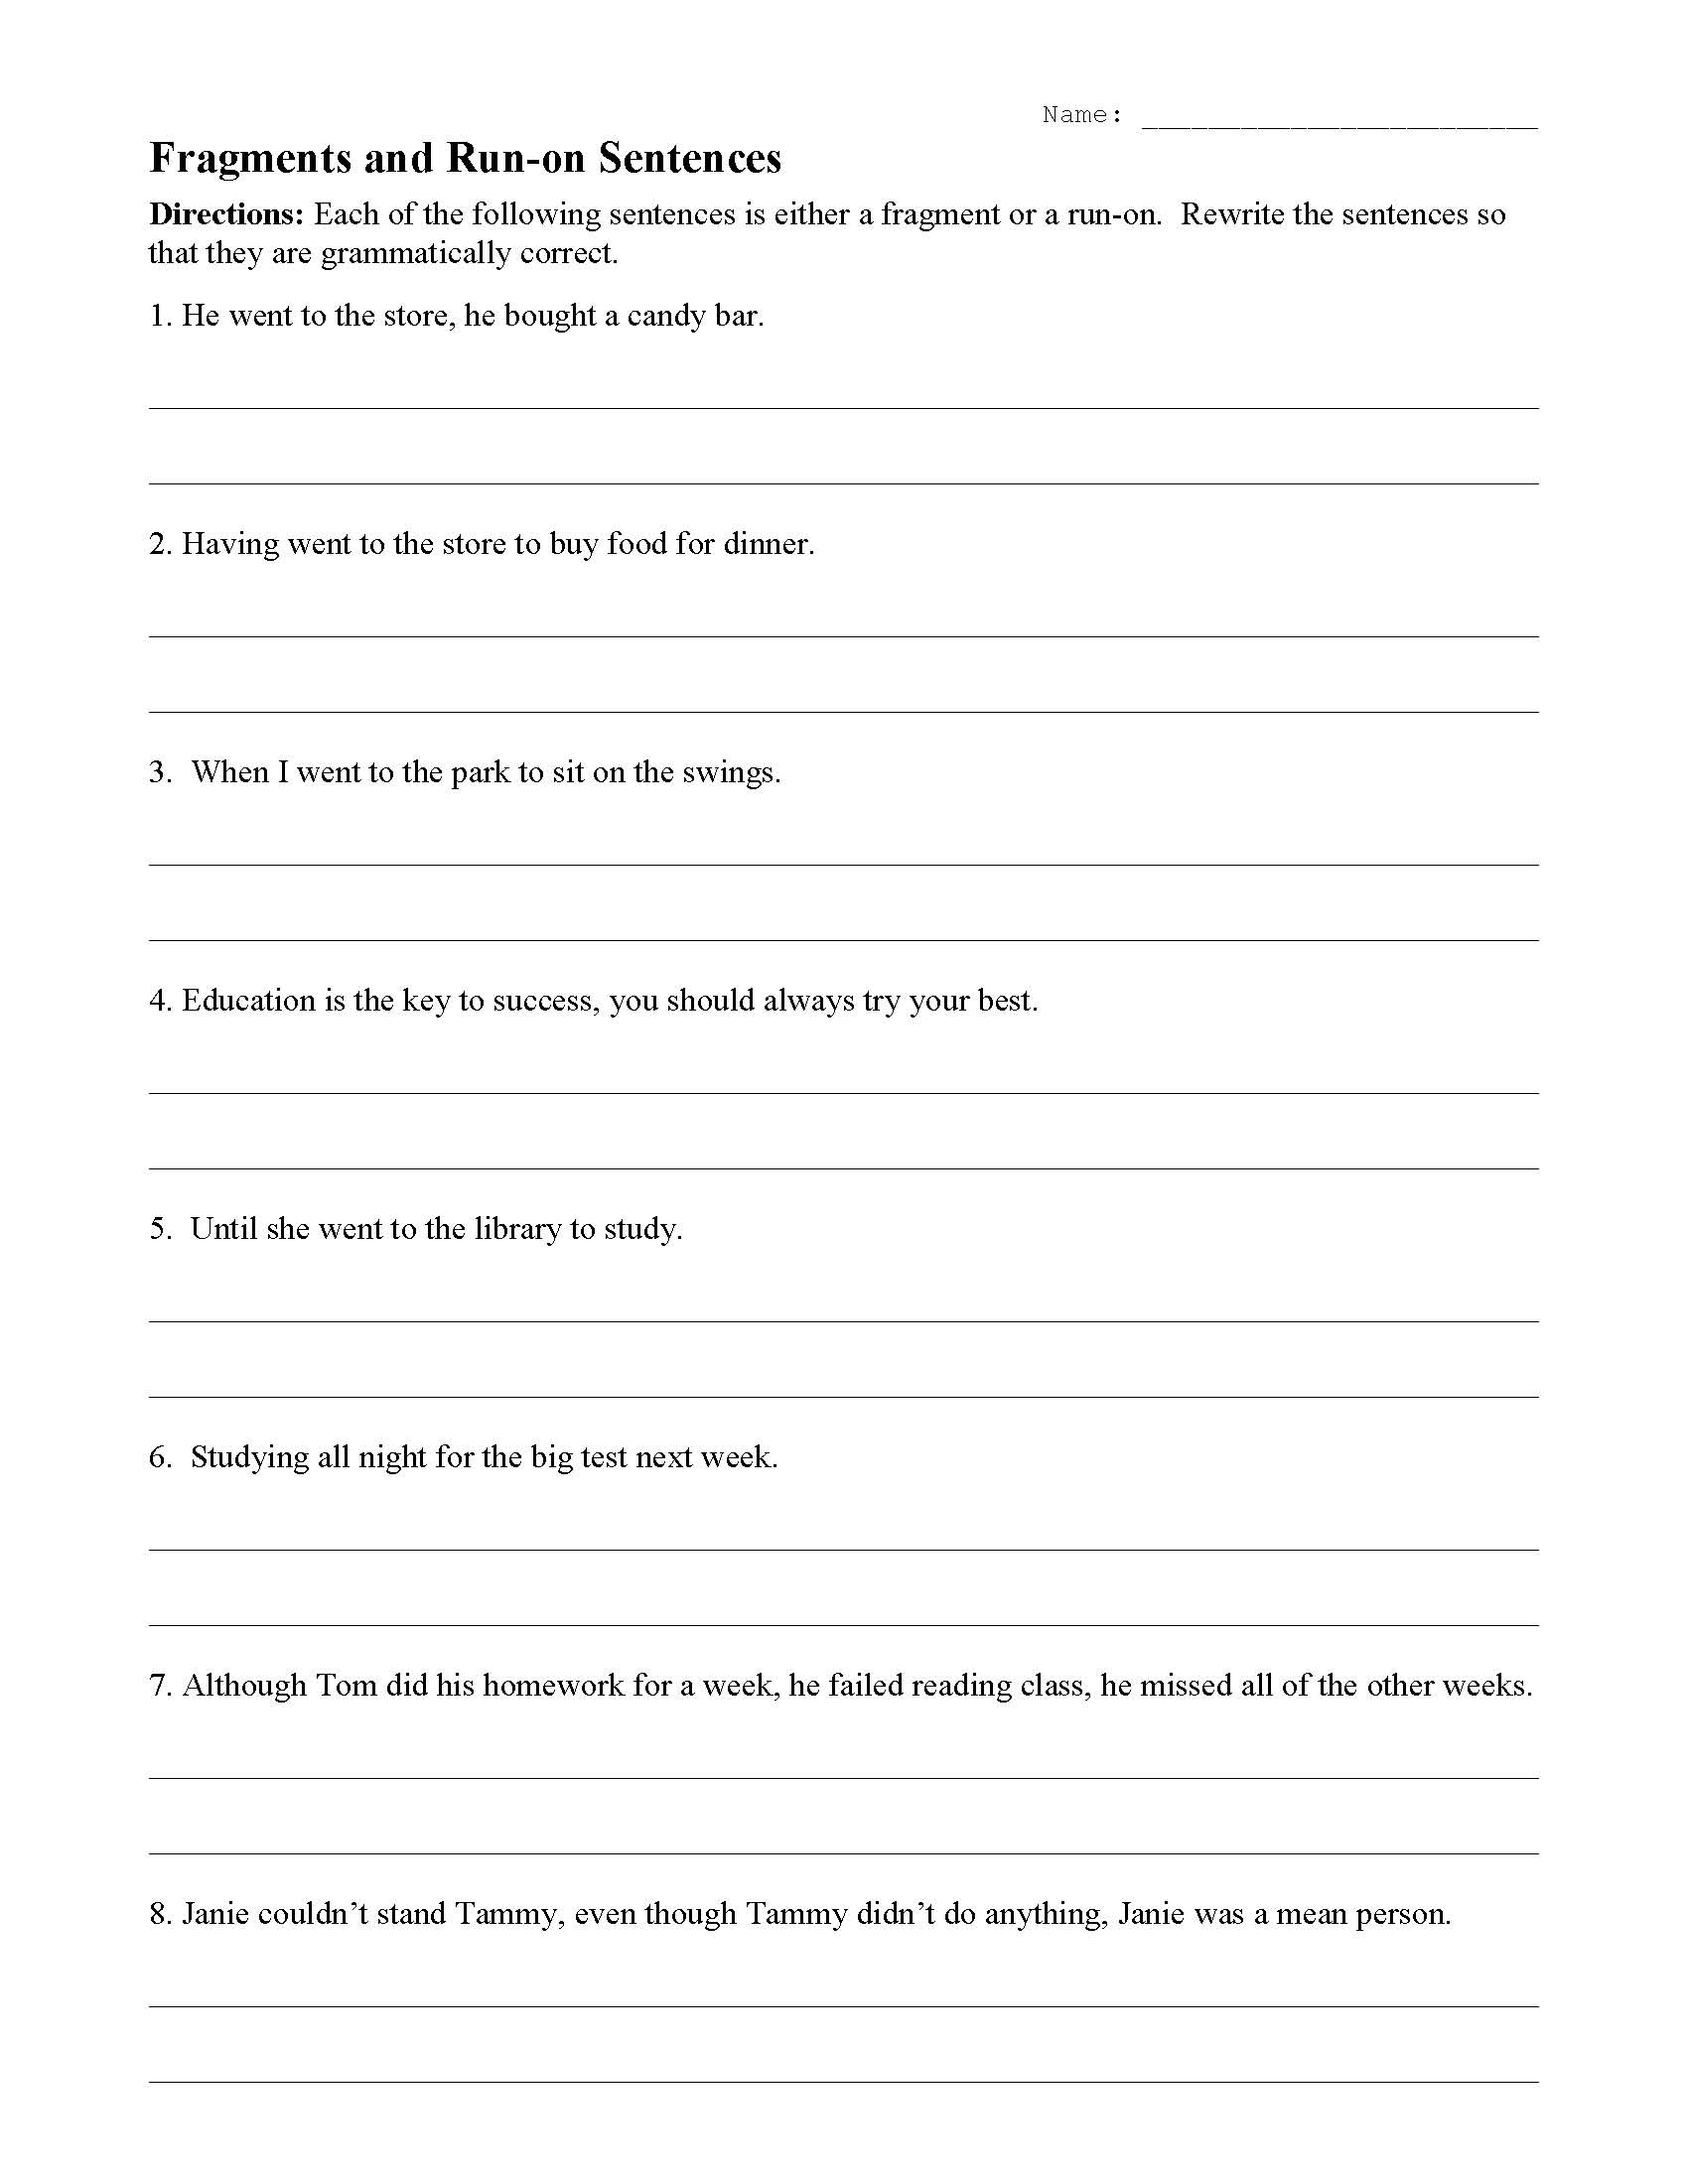 Fragments and Run-On Sentences Worksheet  Sentence Structure Activity Pertaining To Sentence Or Fragment Worksheet